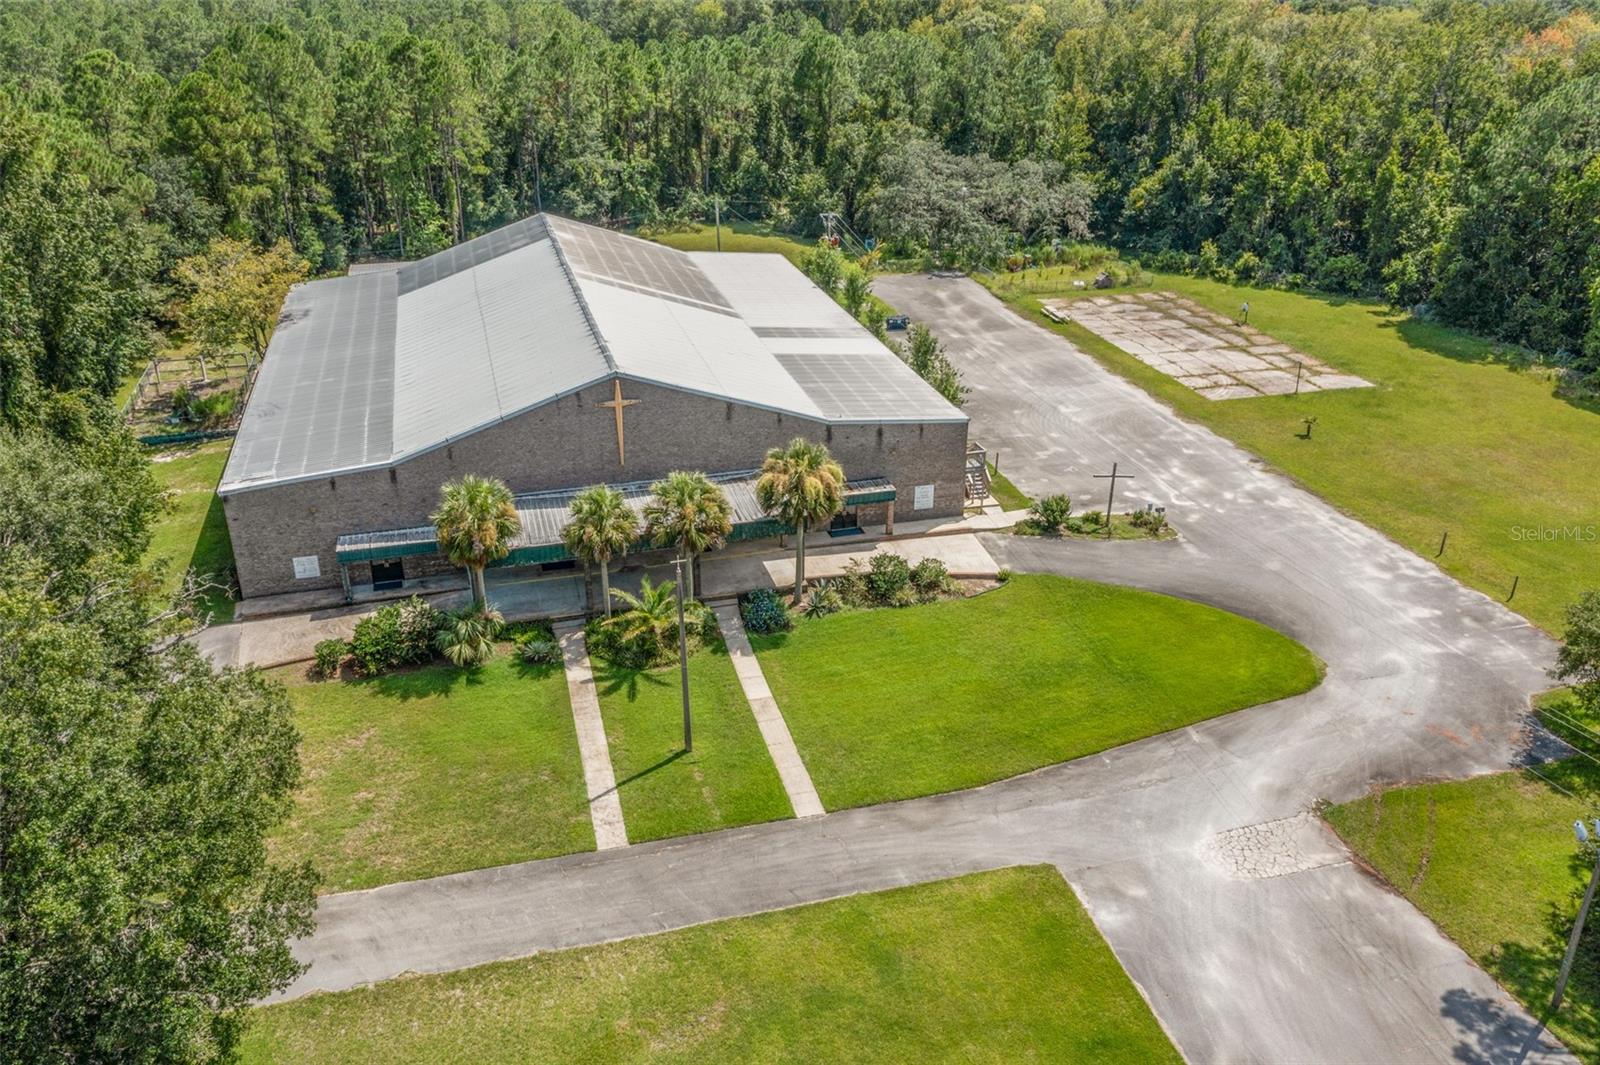 Church and School Building For Sale in Bunnell, FL